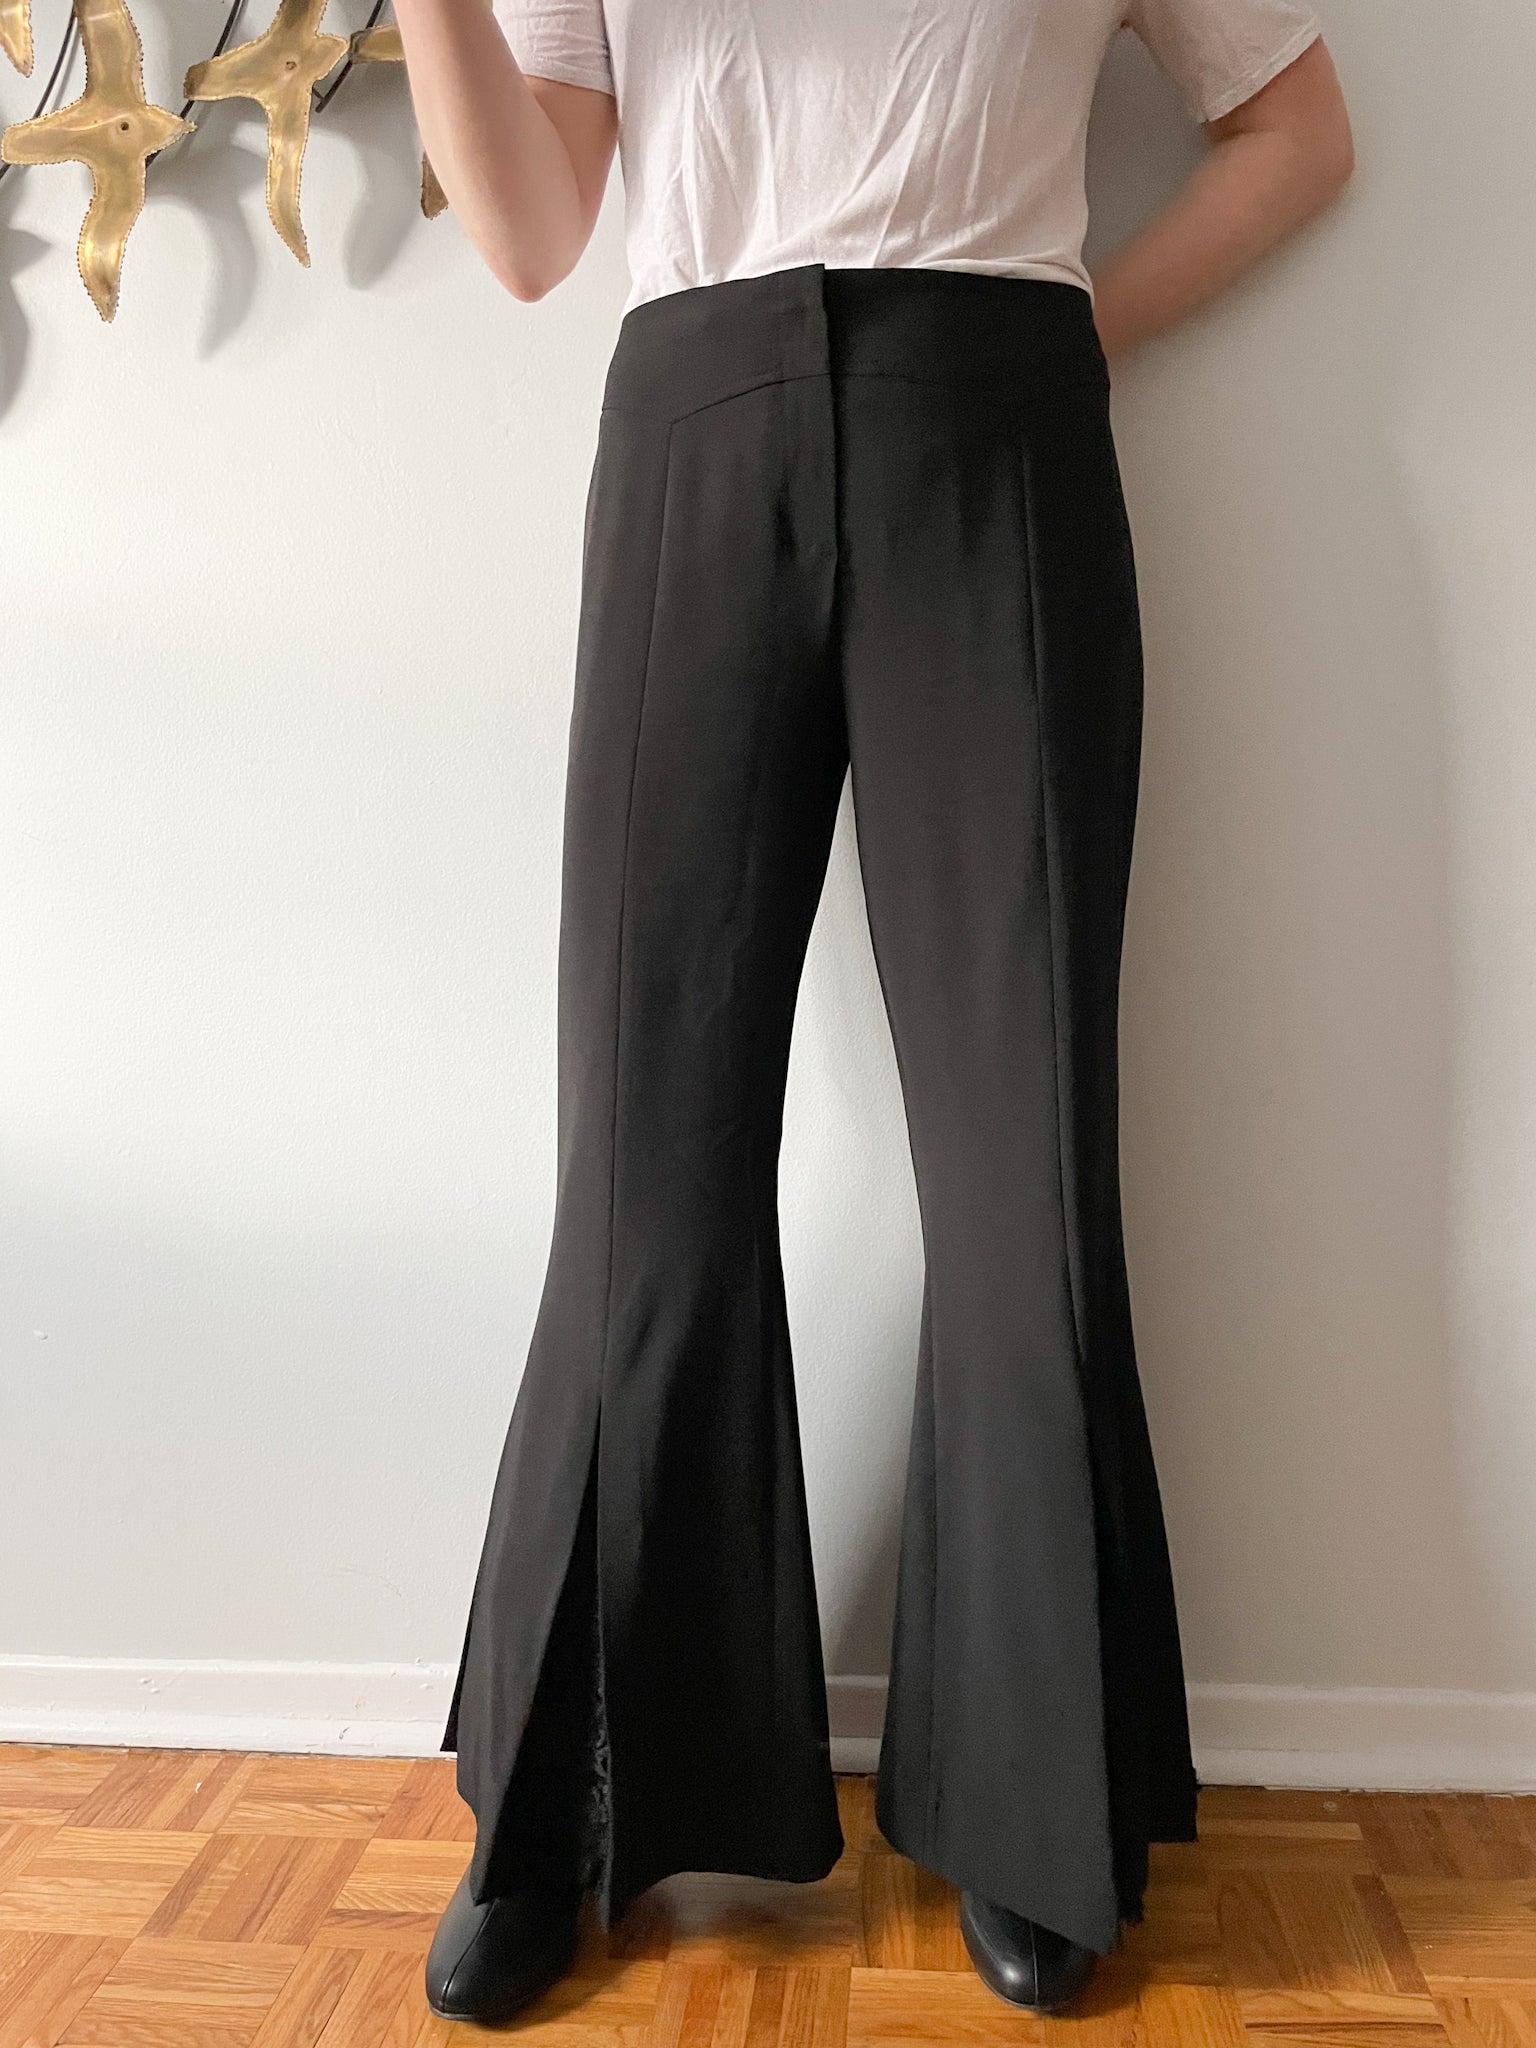 Miss Tic Black High Rise Lace High Rise Flare Trouser Pants